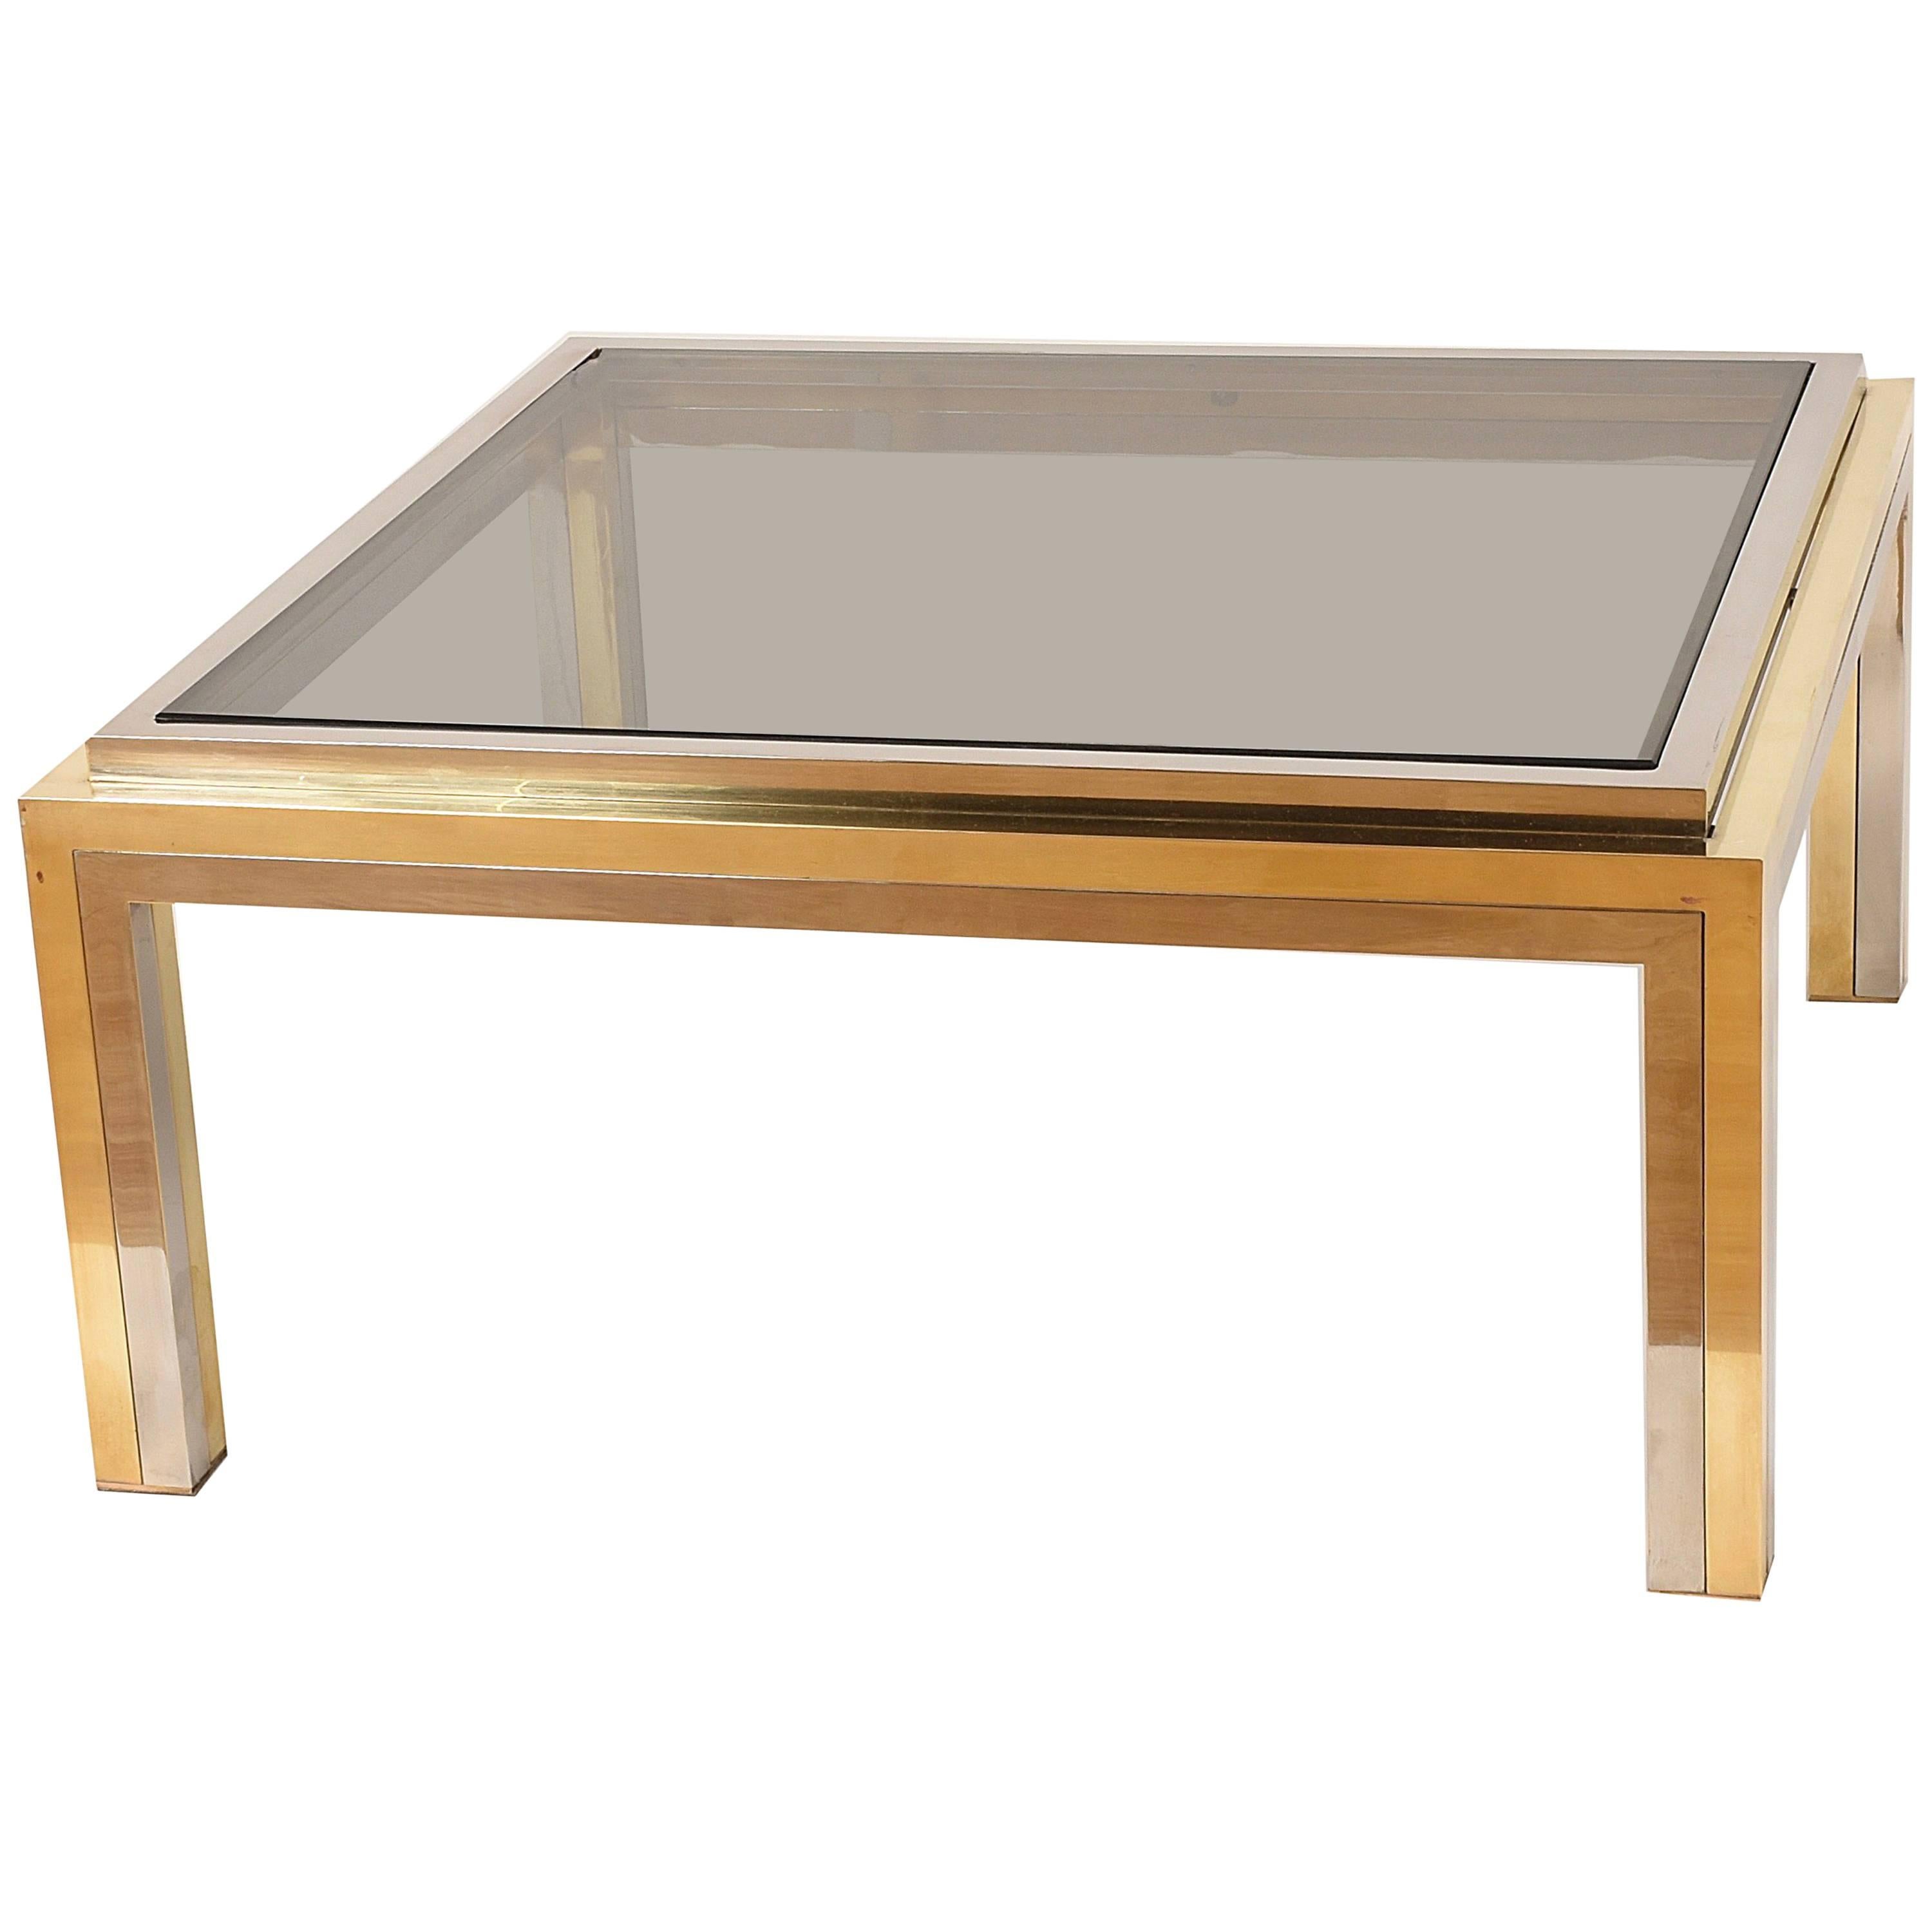 Romeo Rega, Square Coffee Table in Brass and Chrome, Smoked Glass, Italy, 1970s